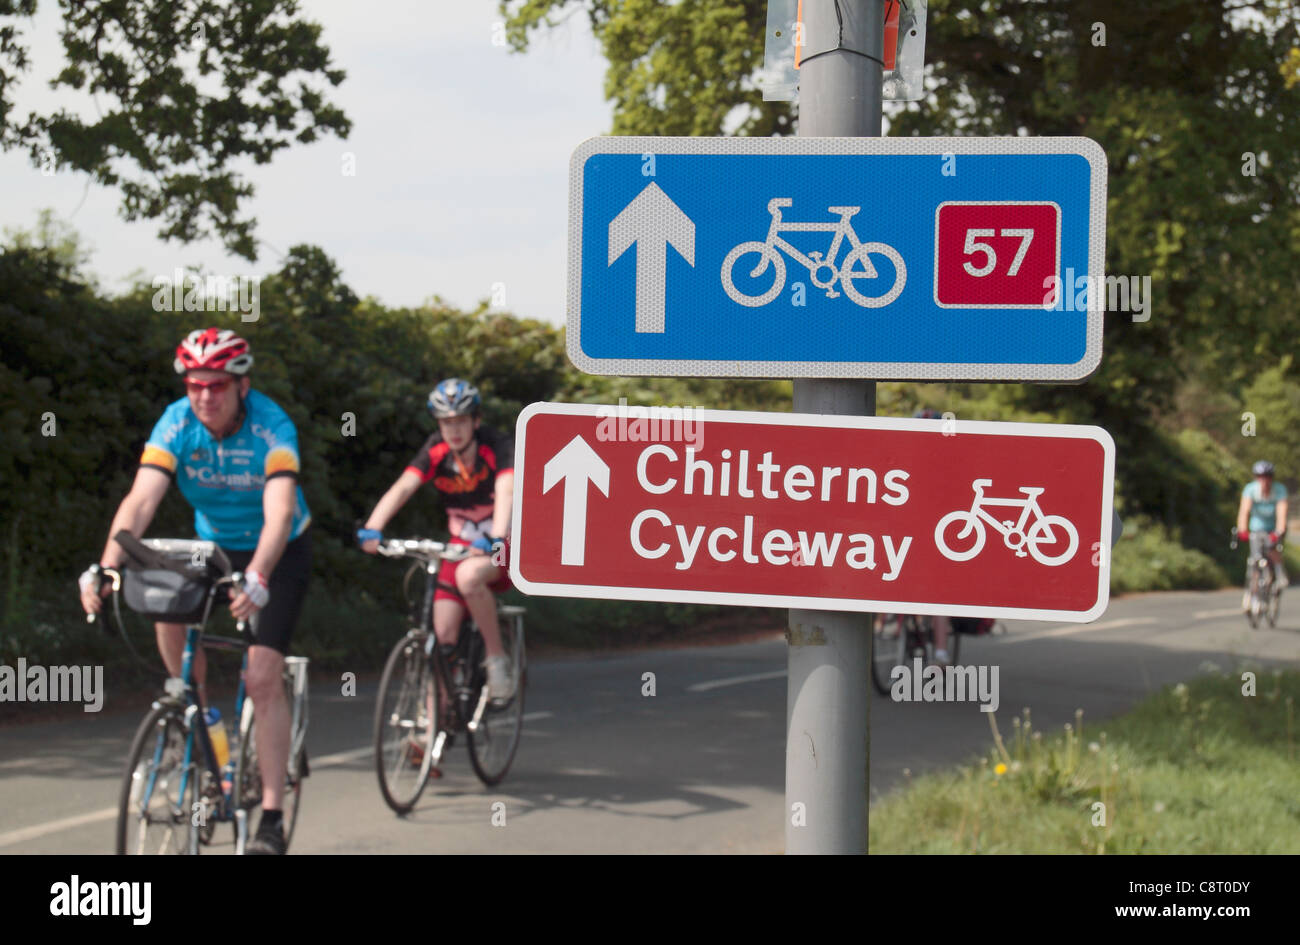 Cyclists ride past road signs for the Chilterns Cycleway and national cycle route 57 near Great Missenden, Buckinghamshire, UK. Stock Photo